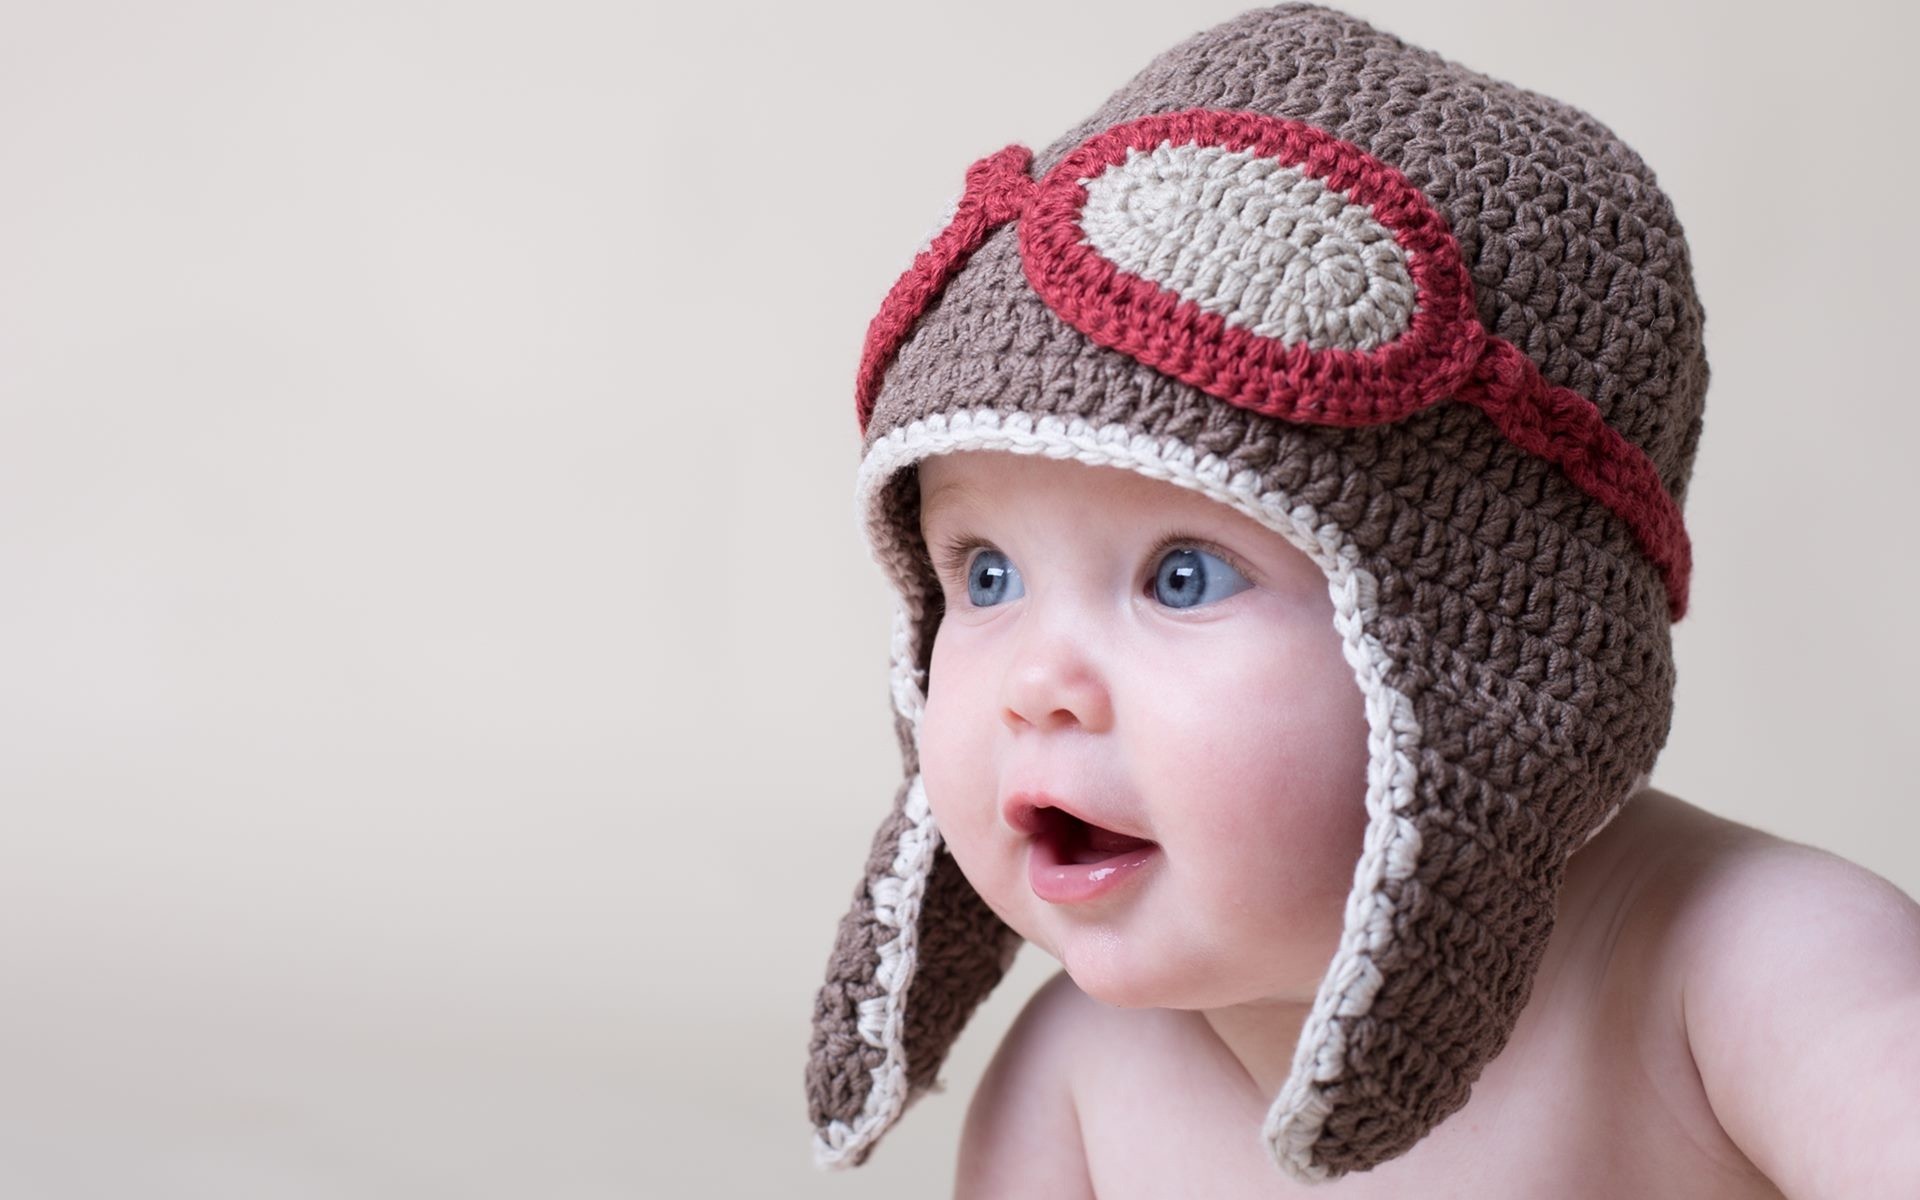 Most Beautiful Baby Boy Wallpapers 
 Data-src /w/full/8/a/e/340283 - Baby Photo With Santa's Cap Hd - HD Wallpaper 